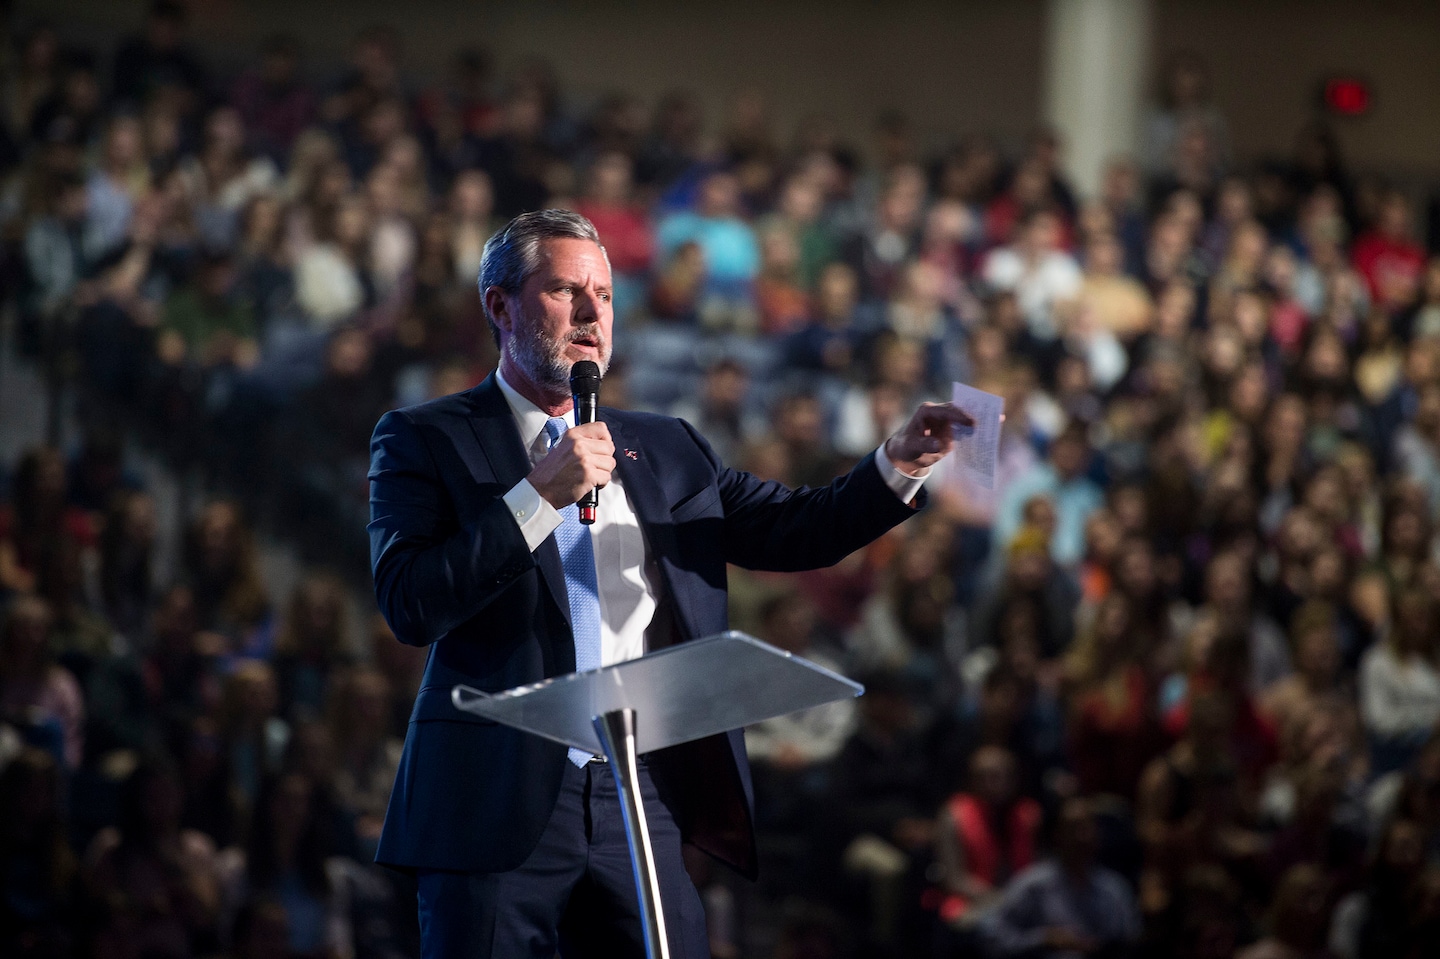 Jerry Falwell Jr. agreed to resign from Liberty University, and then reversed course, school says